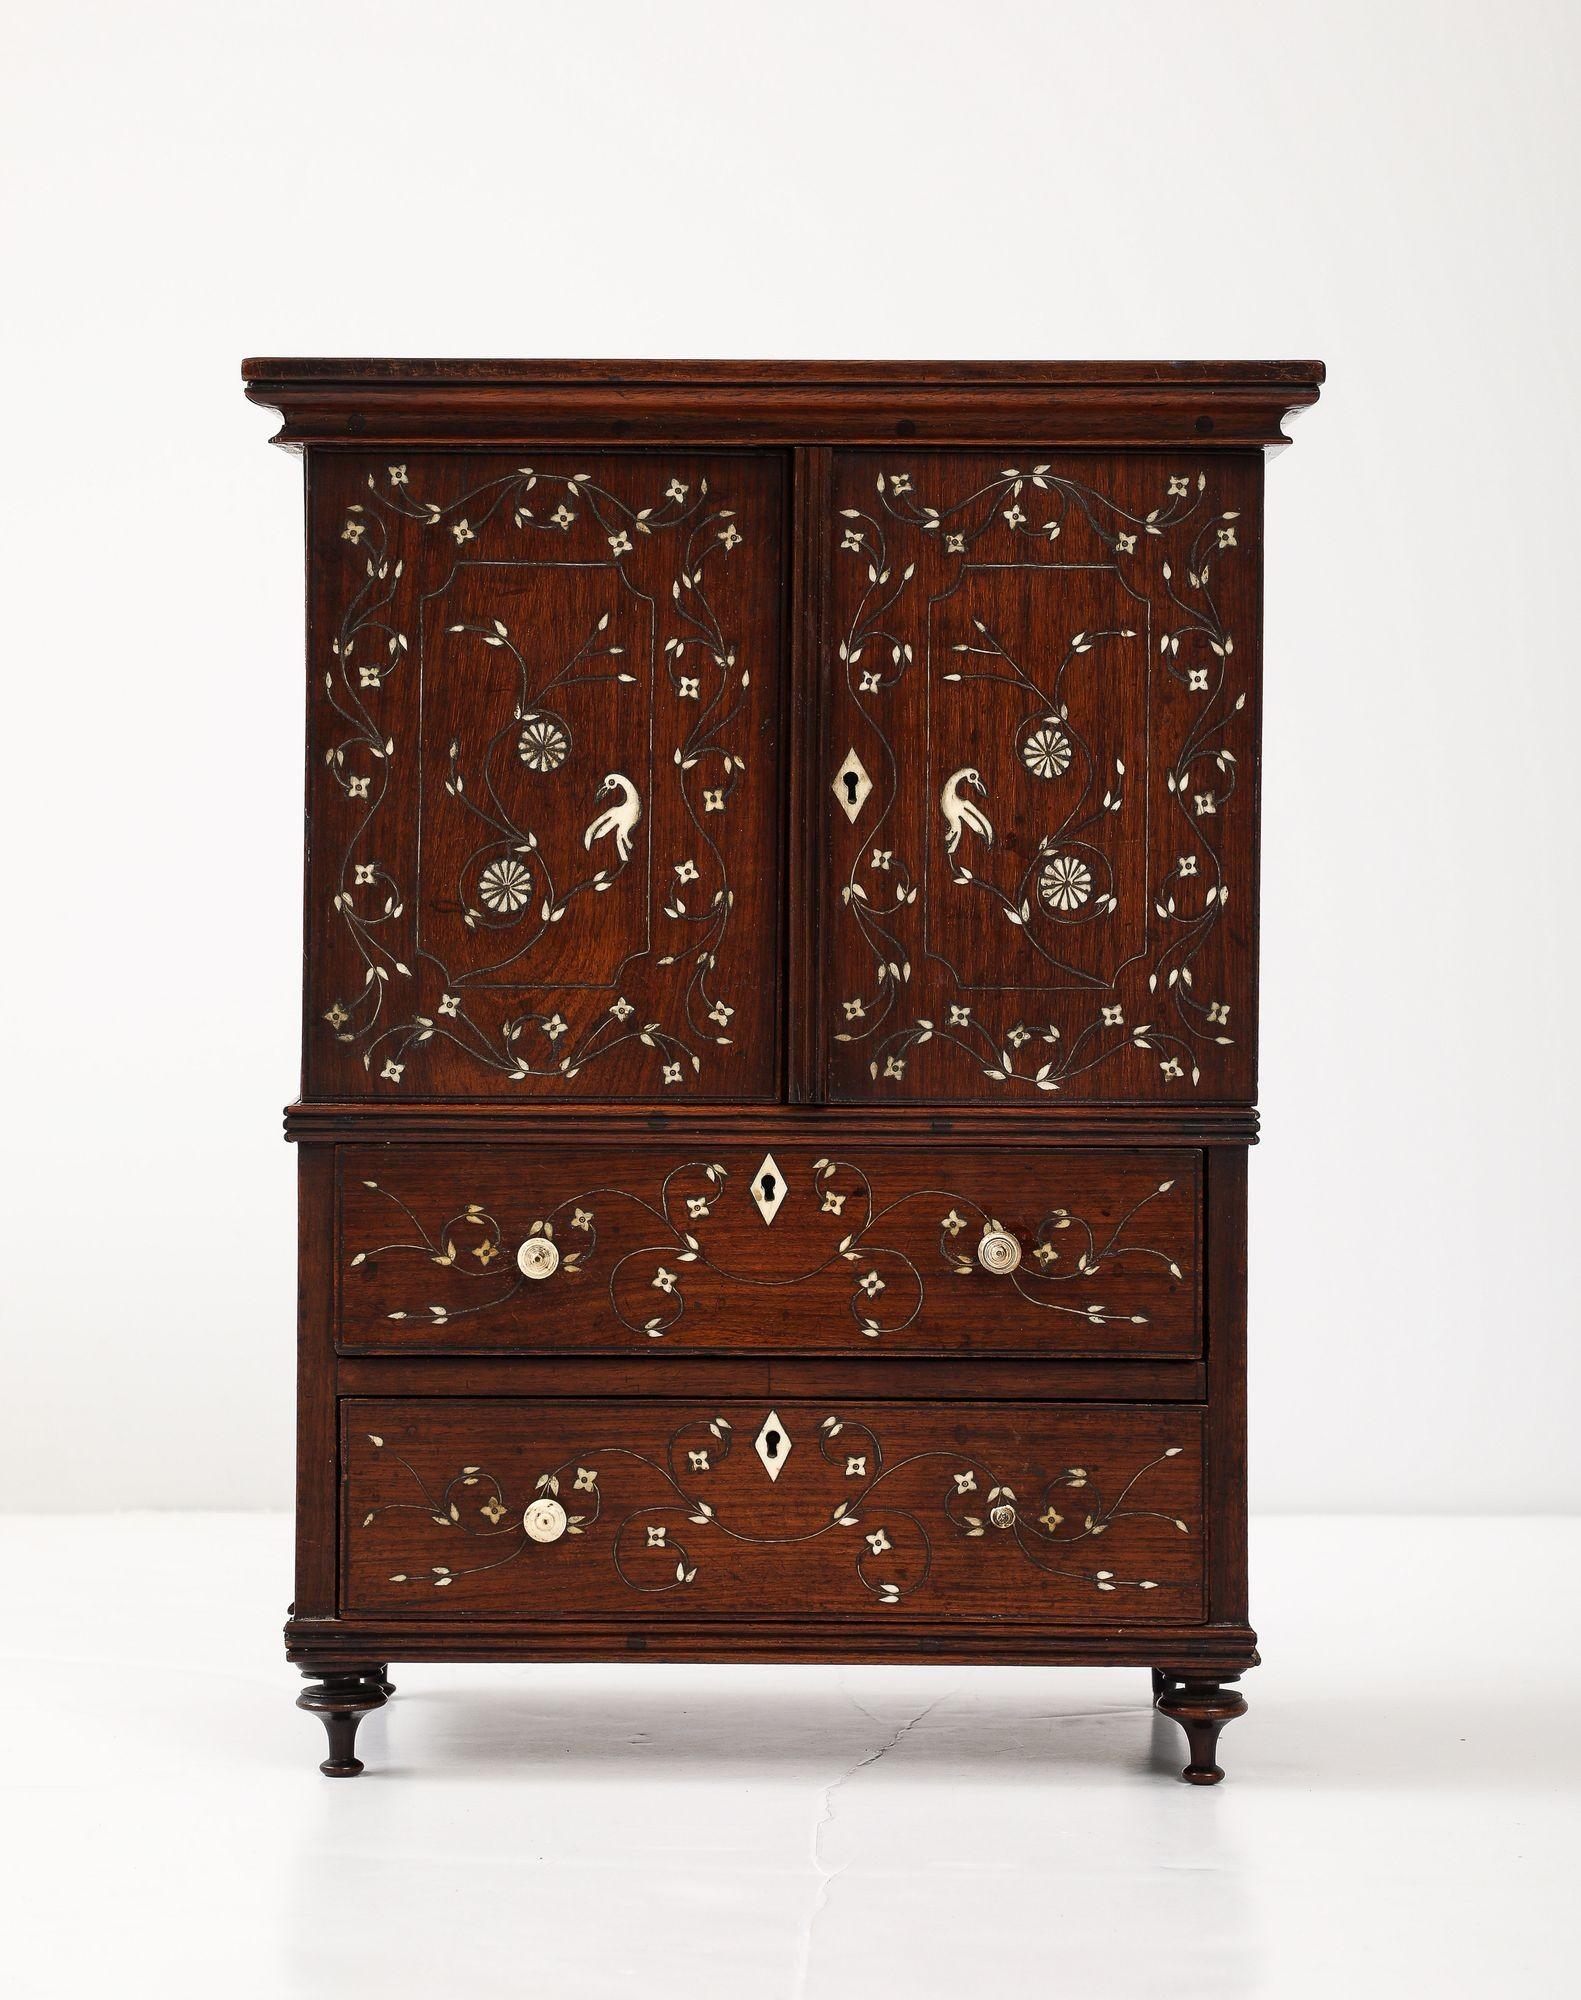 Fine early 19th Century Indian bone inlaid padouk miniature secretary, Monghyr, the two doors inlaid with flowers, vines and birds opening to reveal a fall front writing surface, the reverse side of the doors fitted with pigeonholes with scalloped